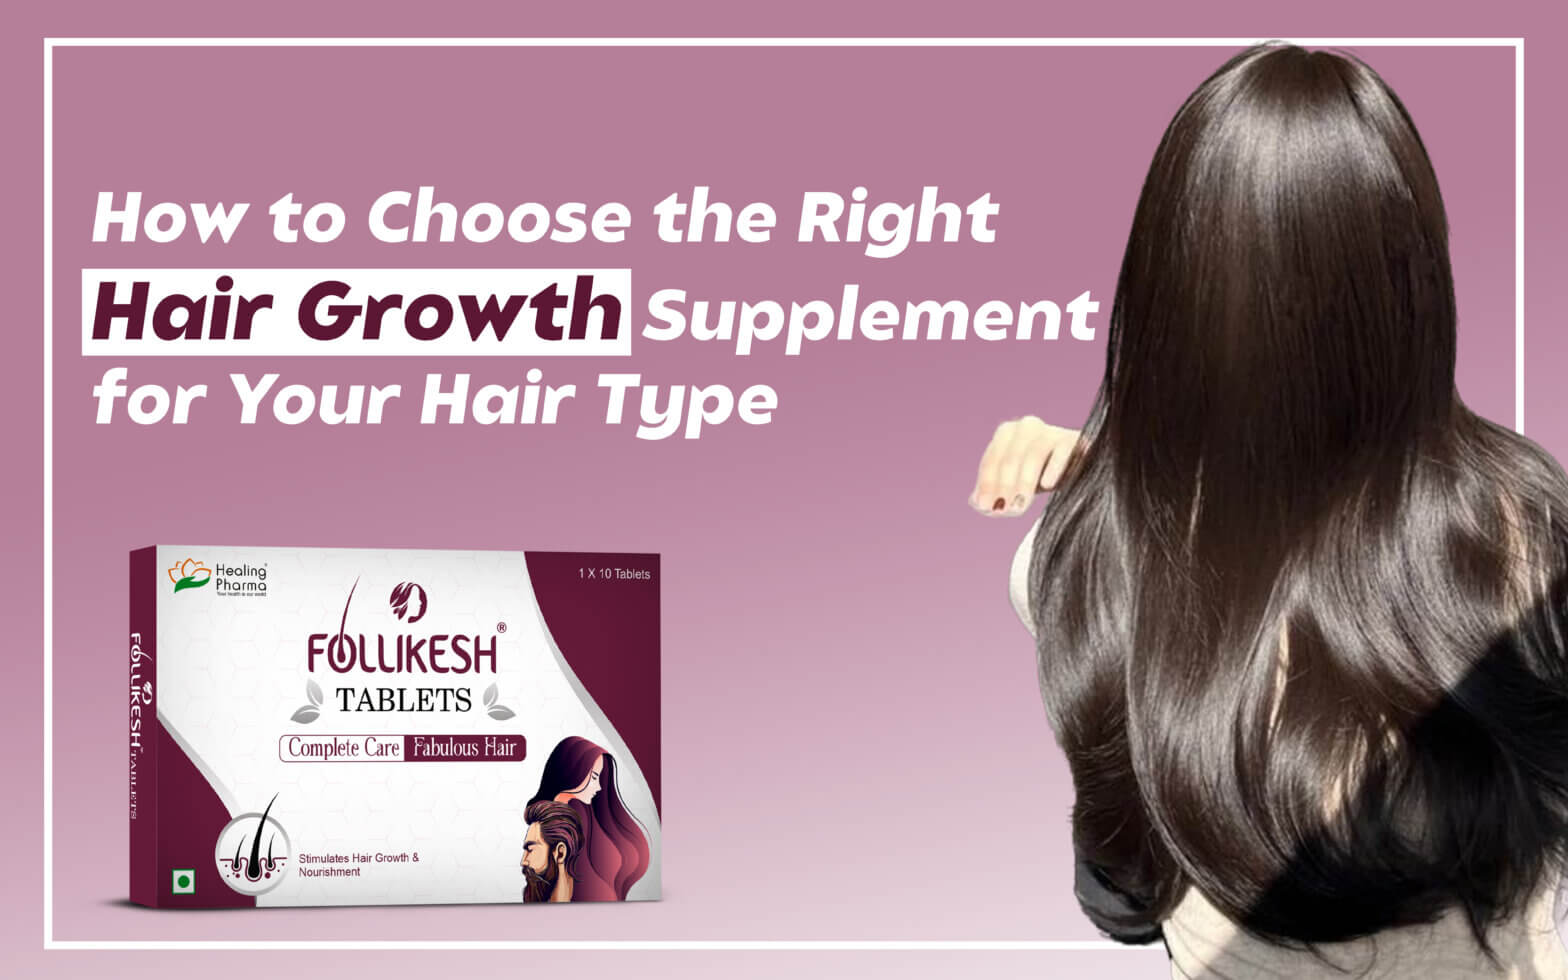 Hair Growth Supplement for Your Hair